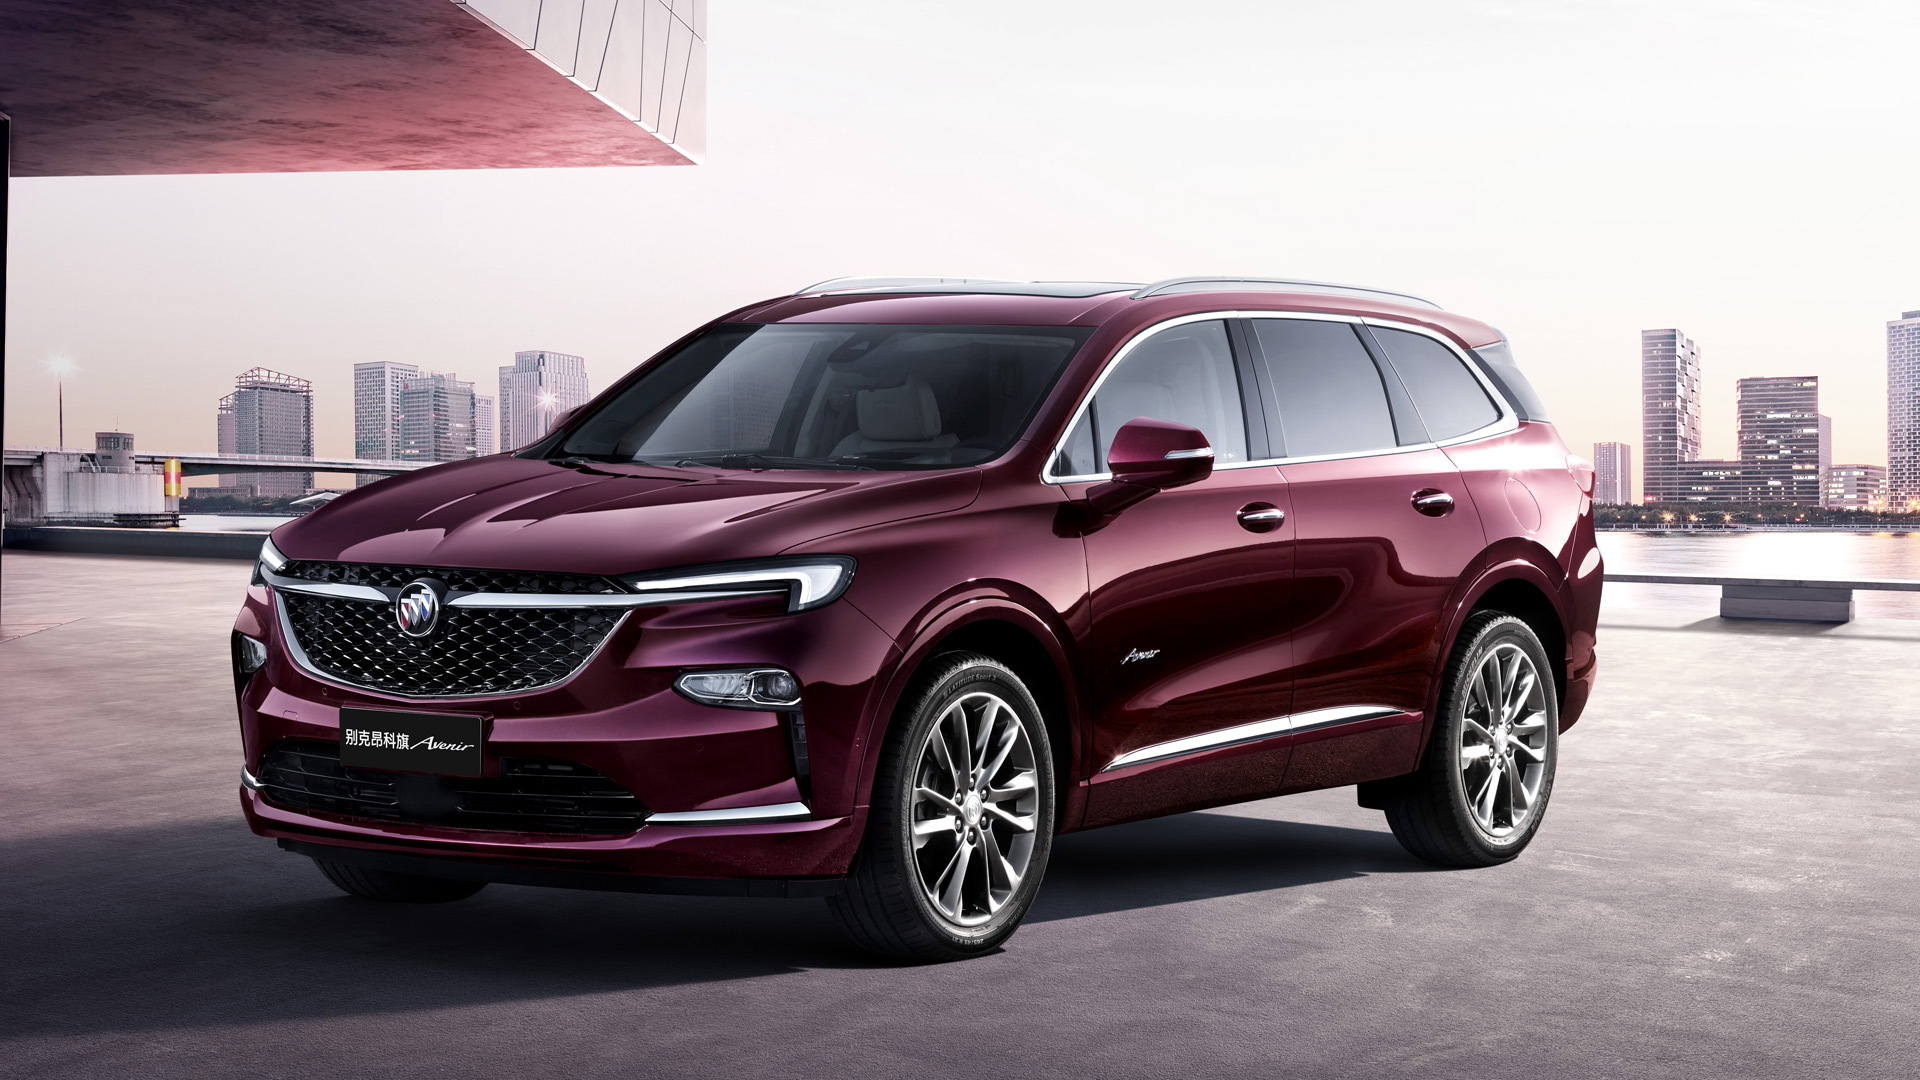 2020 Buick Enclave (Chinese spec)